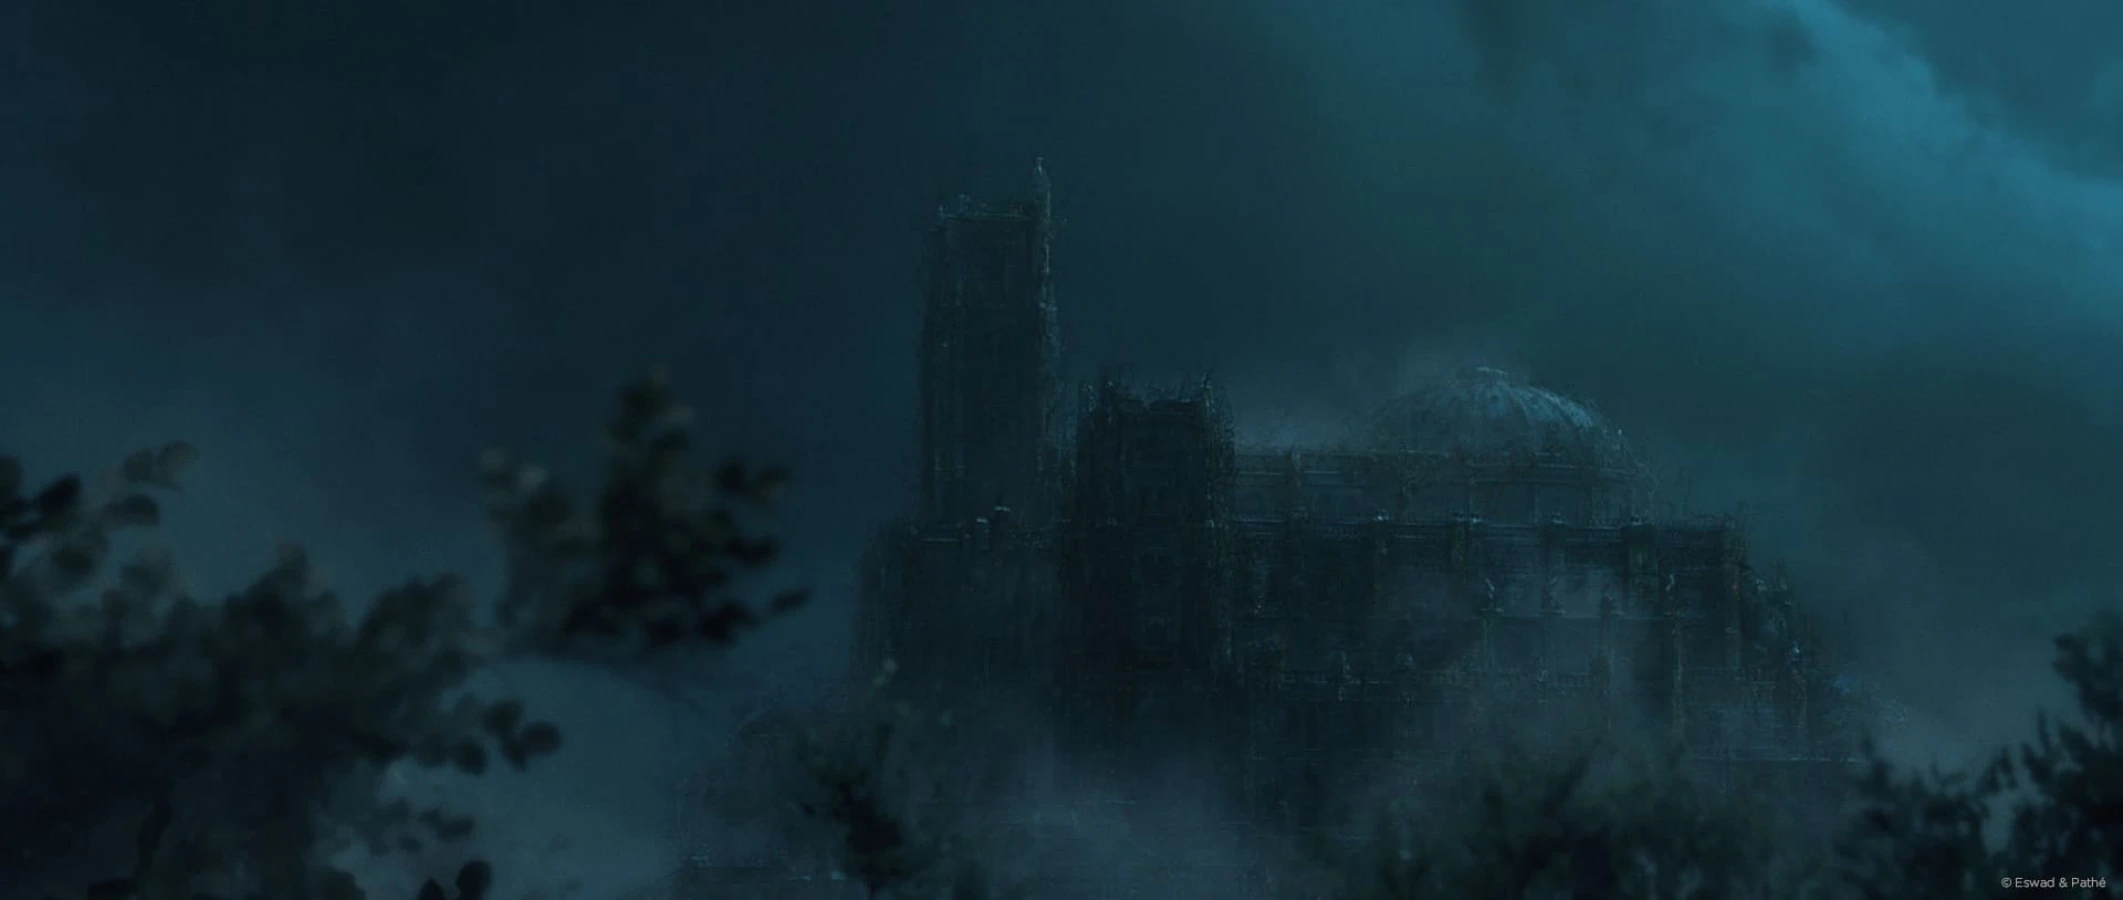  The beauty and the beast castle in nightly fog from Raynault vfx 